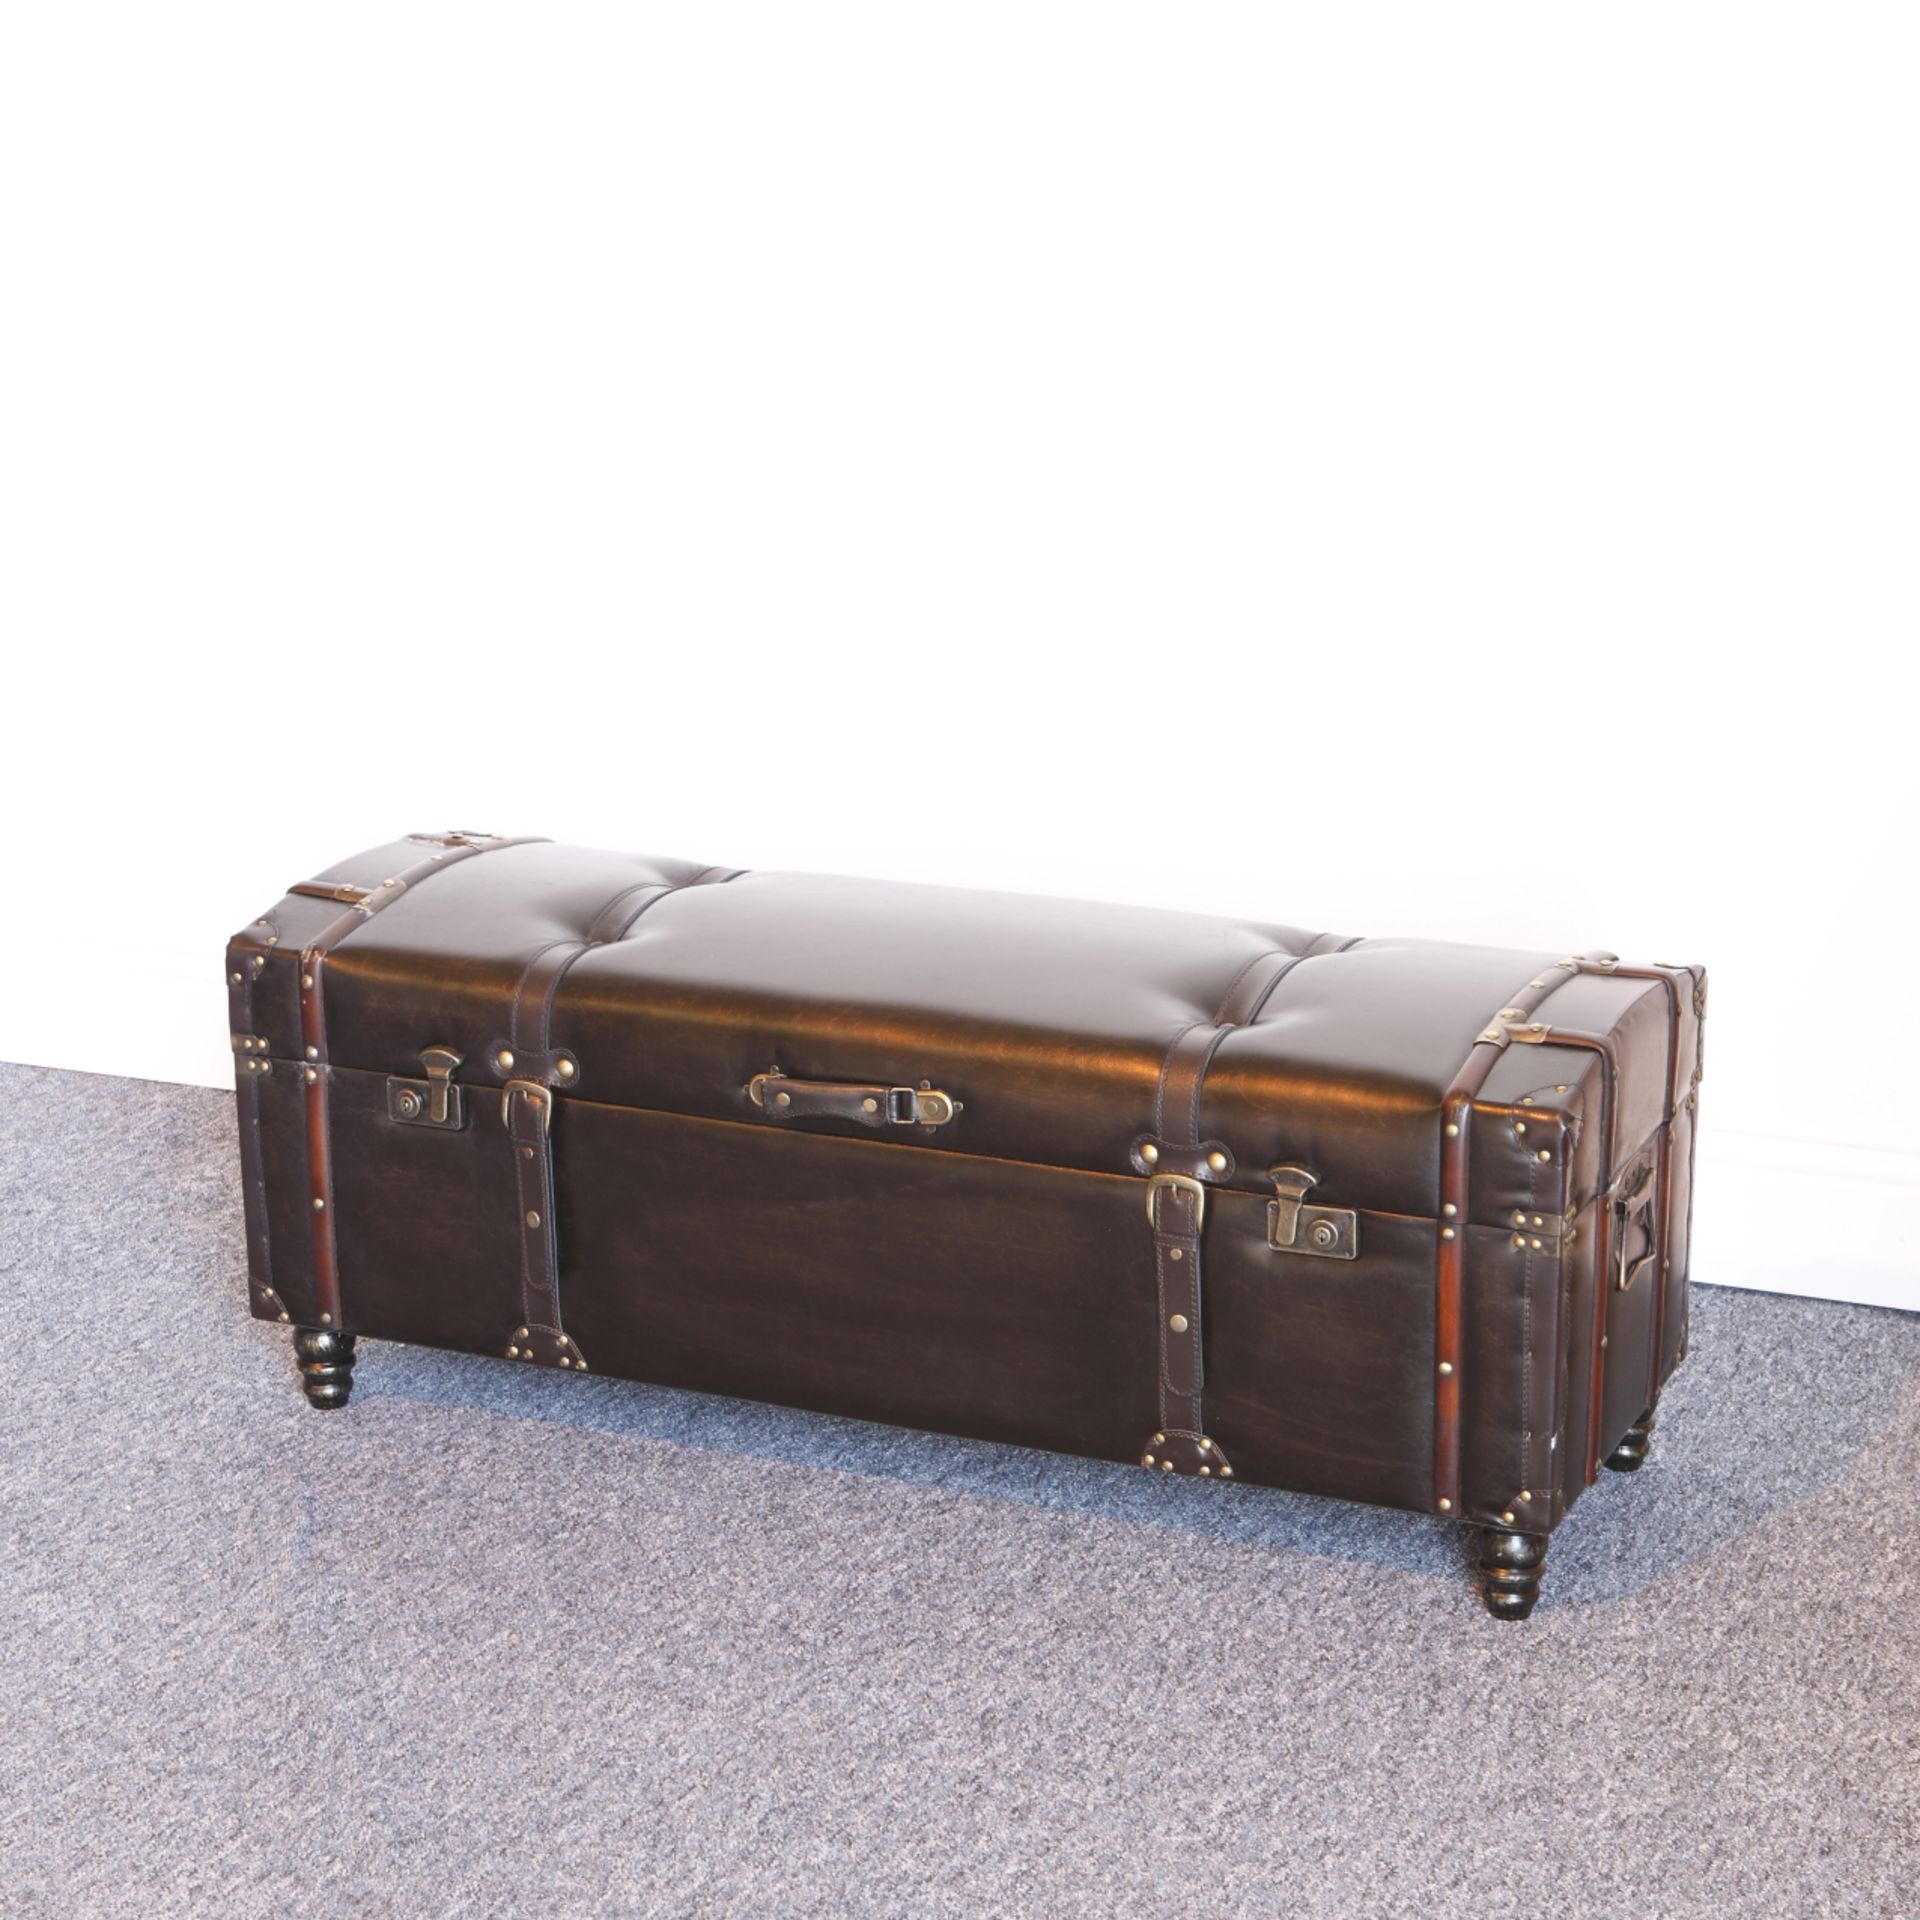 High Resale Value. High Resale Value .Set of 3 Large Fox Leather Storage Ottomans. High-quality. - Image 2 of 5